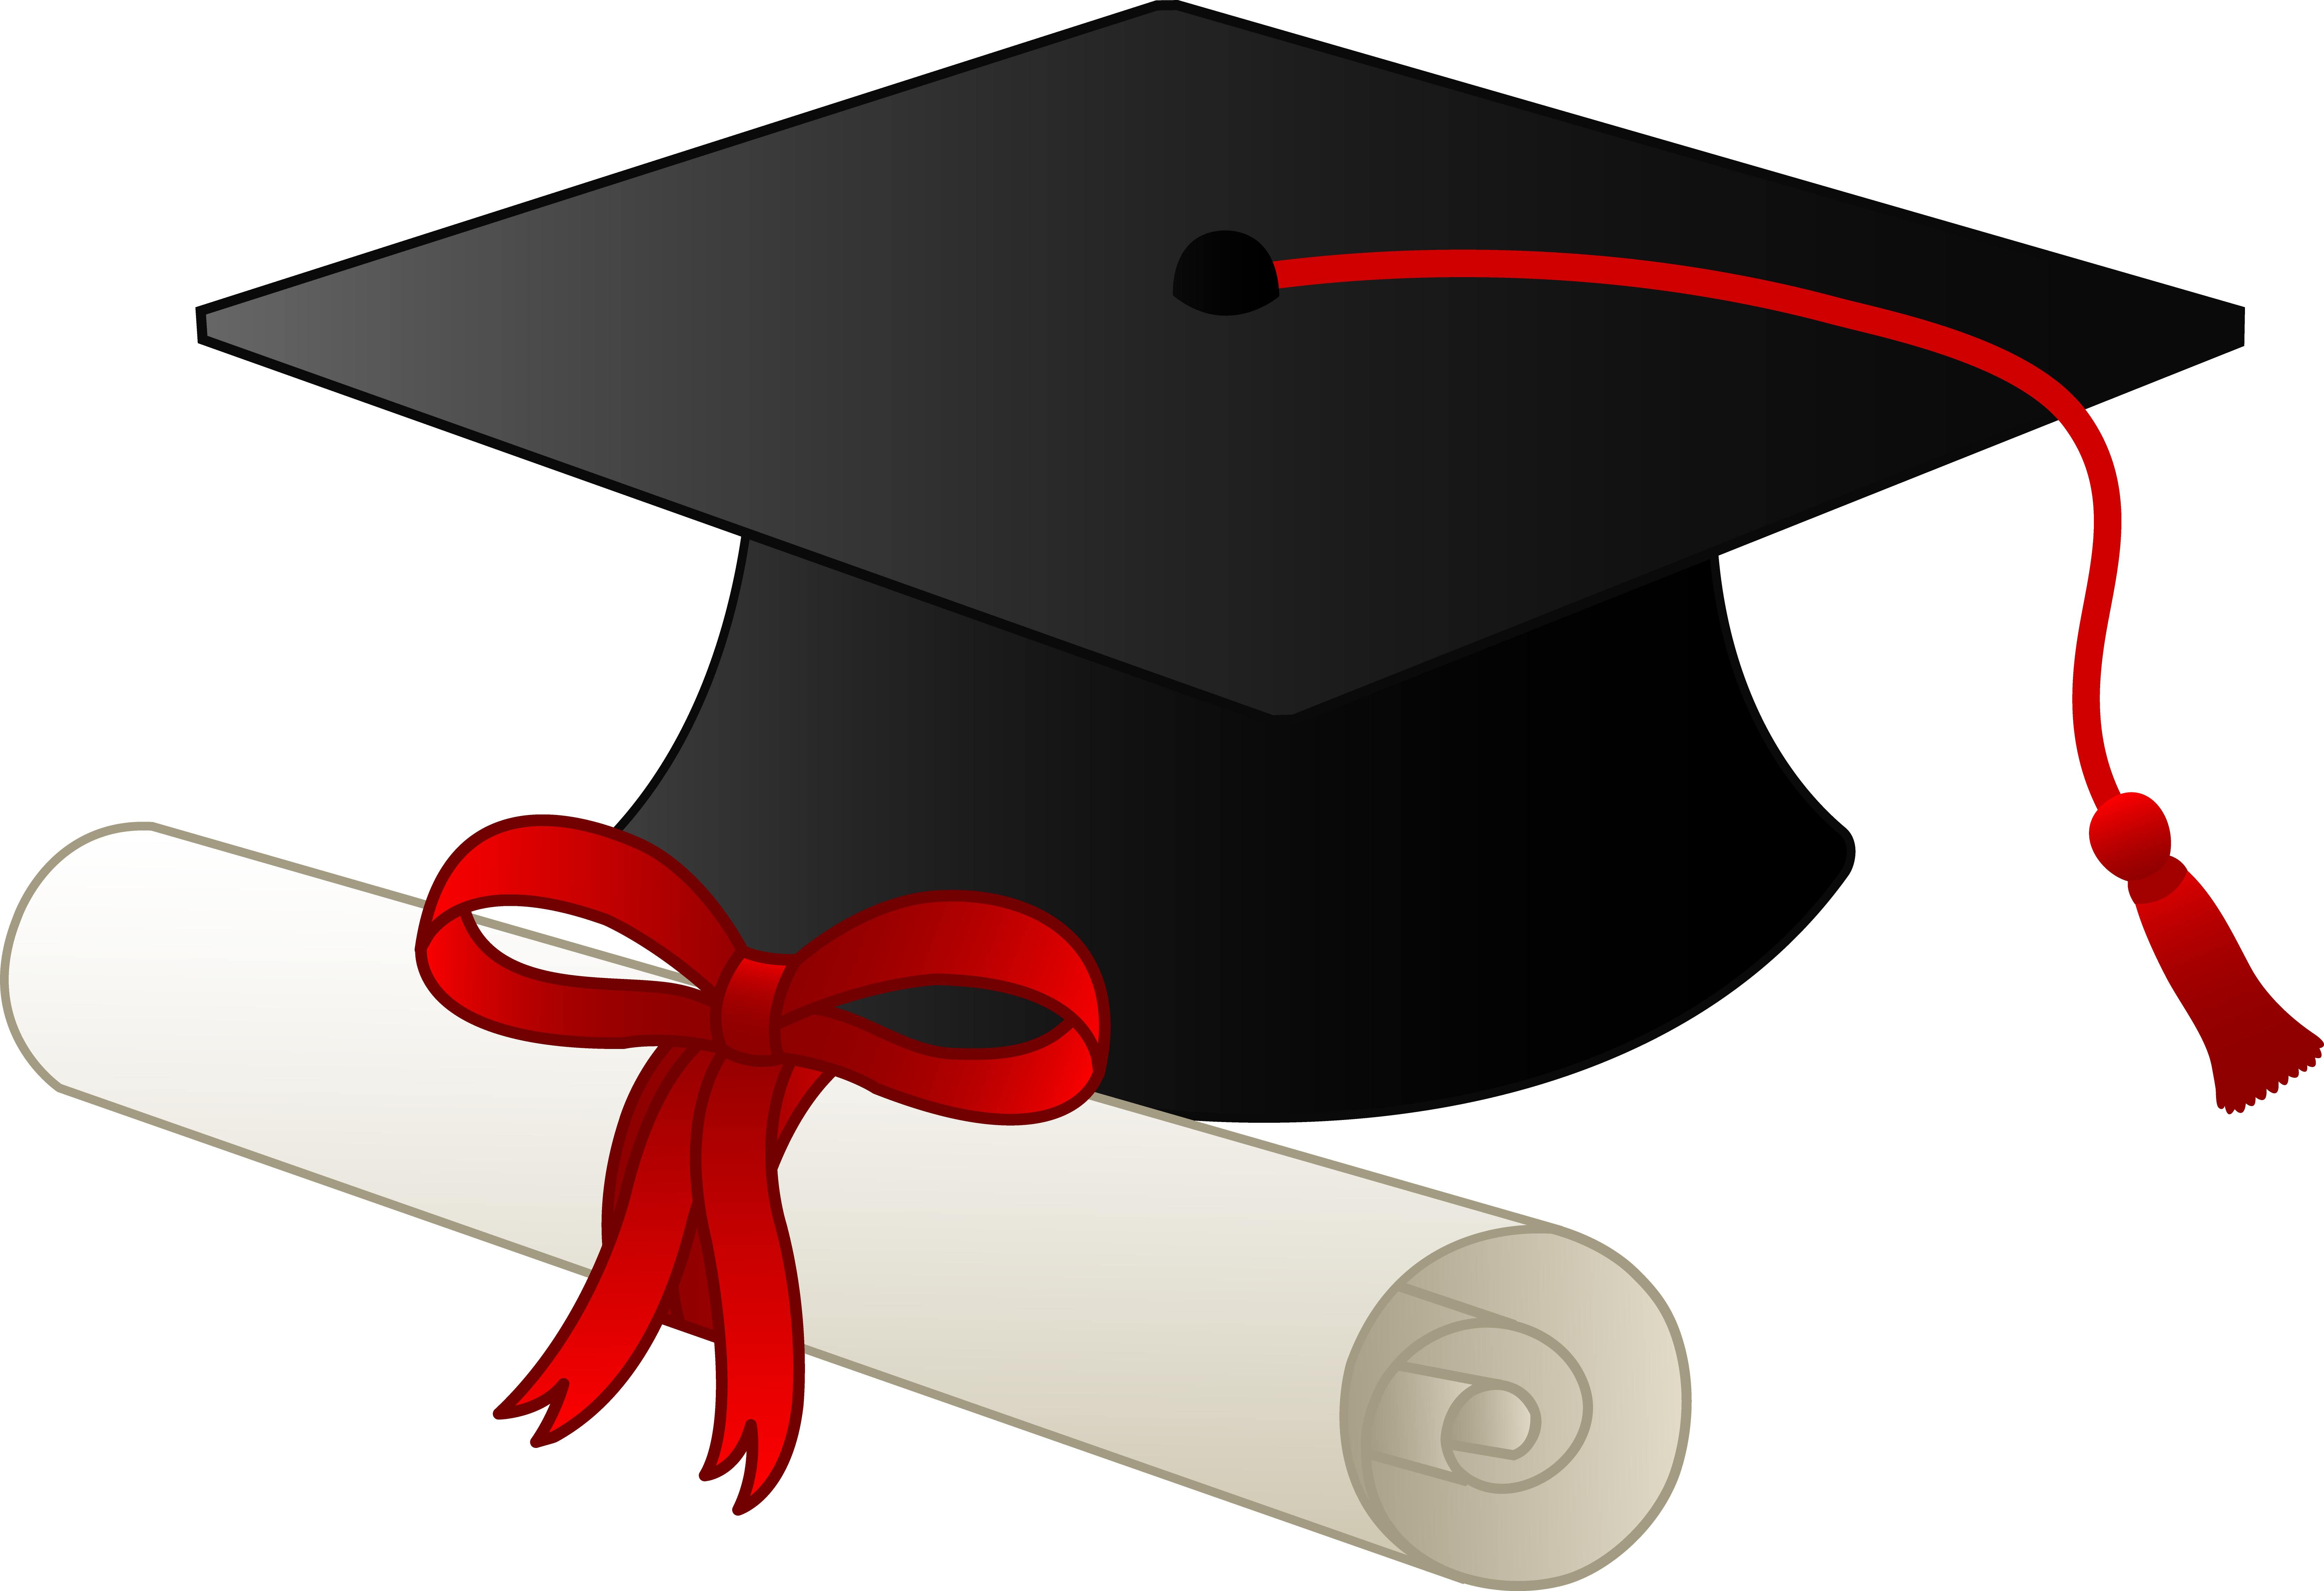 Personalize Your Graduation with a Variety of Graduation Cliparts